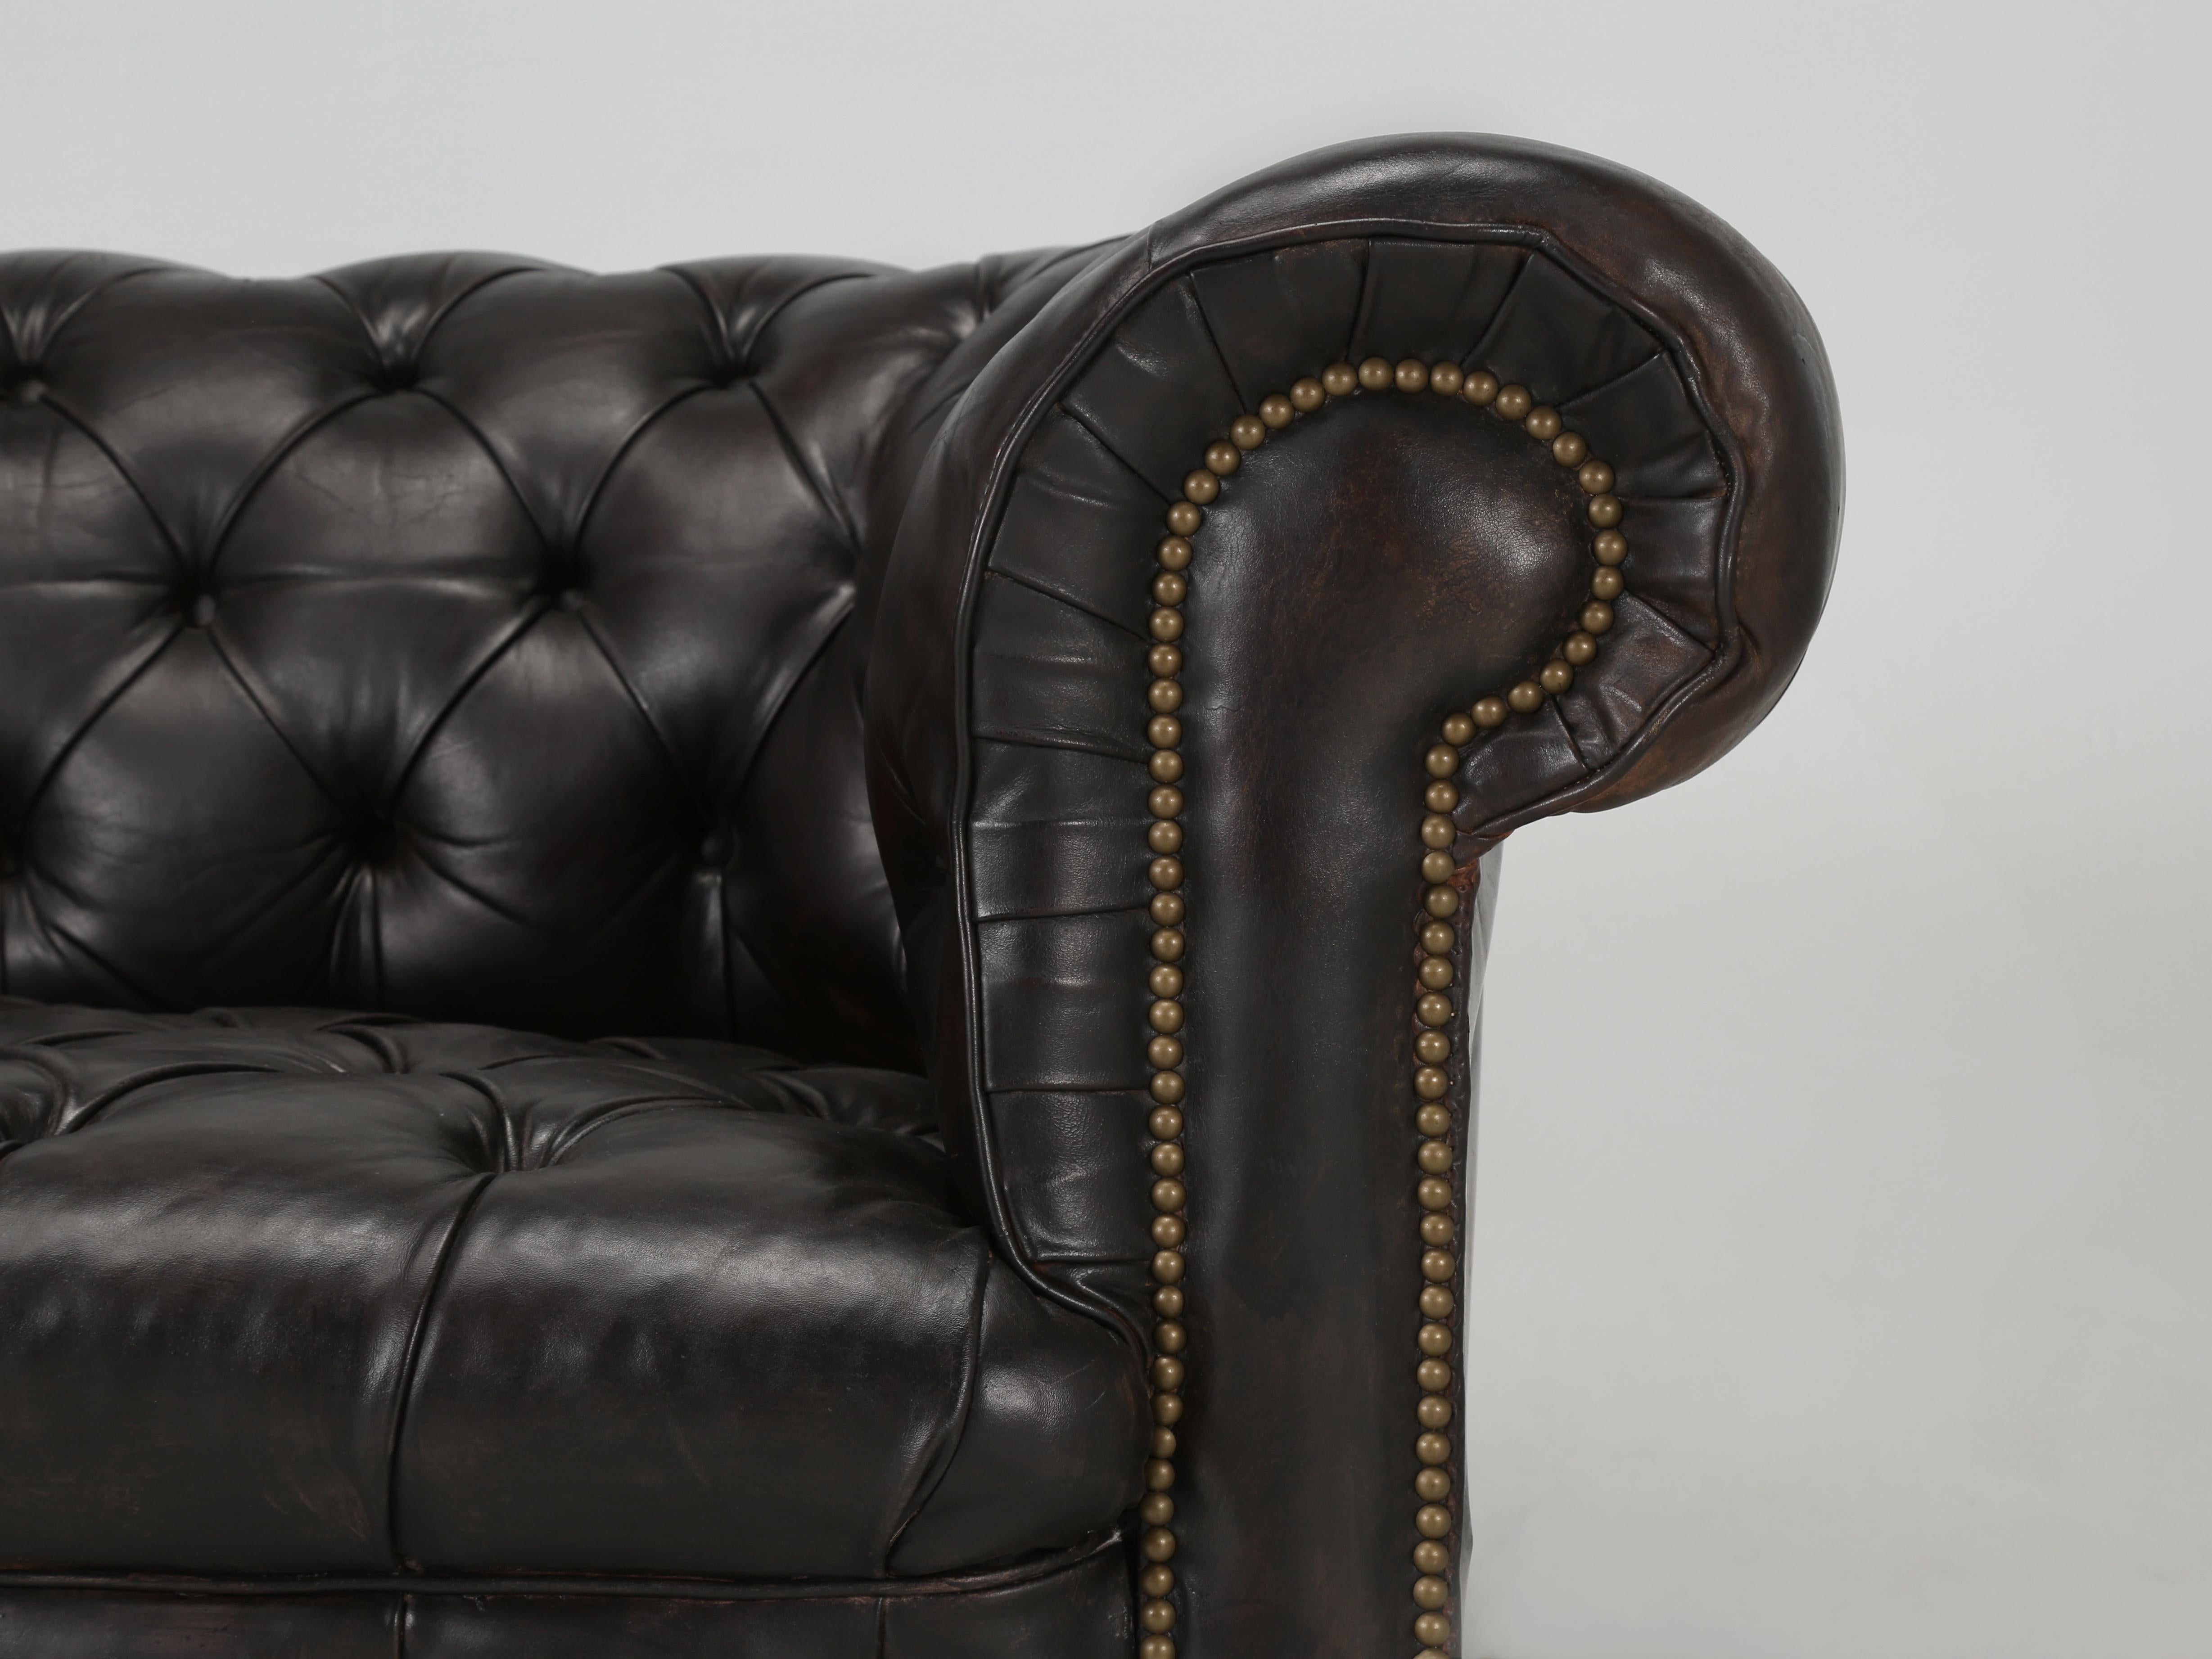 Antique English Tufted Original Leather Chesterfield Sofa Thoroughly Restored For Sale 5